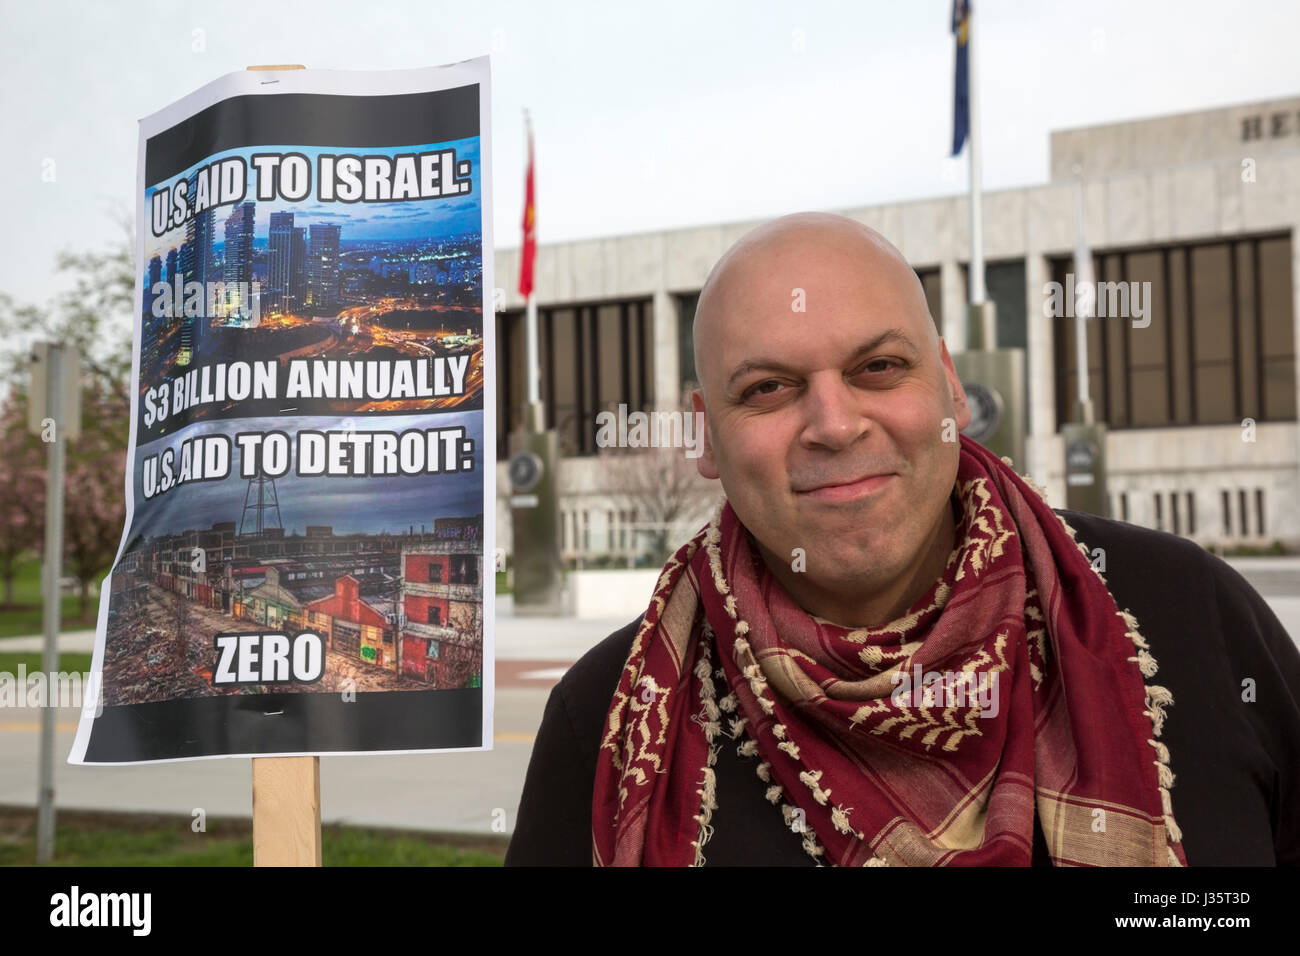 Dearborn, Michigan, USA. 3rd May, 2017. Amer Zahr joins a vigil in support of 1500 Palestinian political prisoners who are on a hunger strike to protest conditions in Israeli prisons. The vigil was organized by American Muslims for Palestine and Jewish Voice for Peace. Credit: Jim West/Alamy Live News Stock Photo